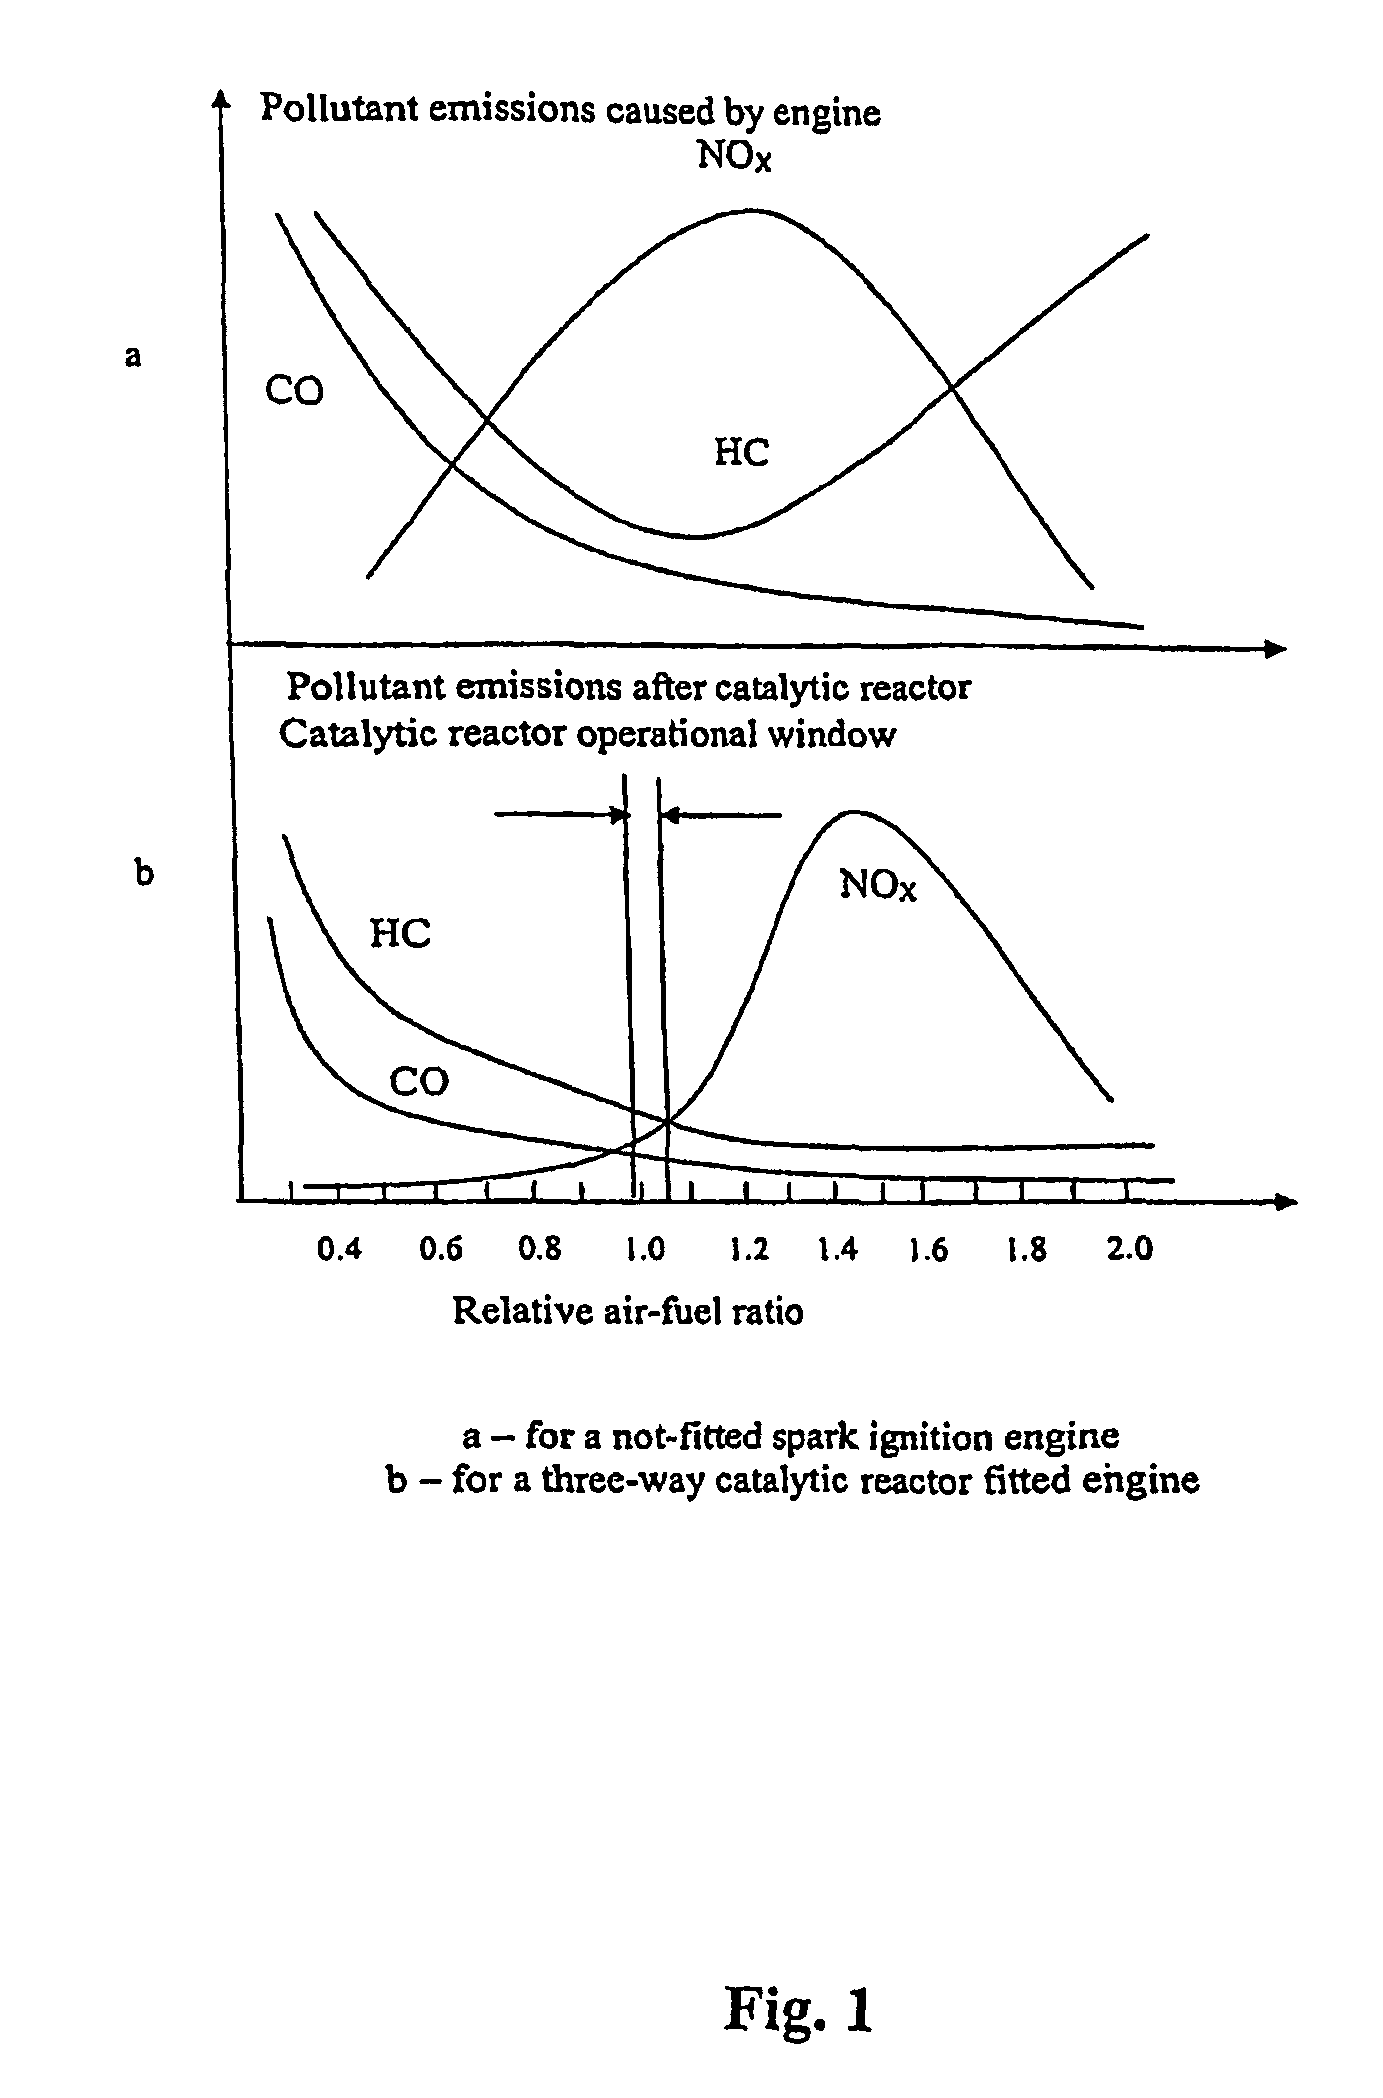 Method of using lean fuel-air mixtures at all operating regimes of a spark ignition engine